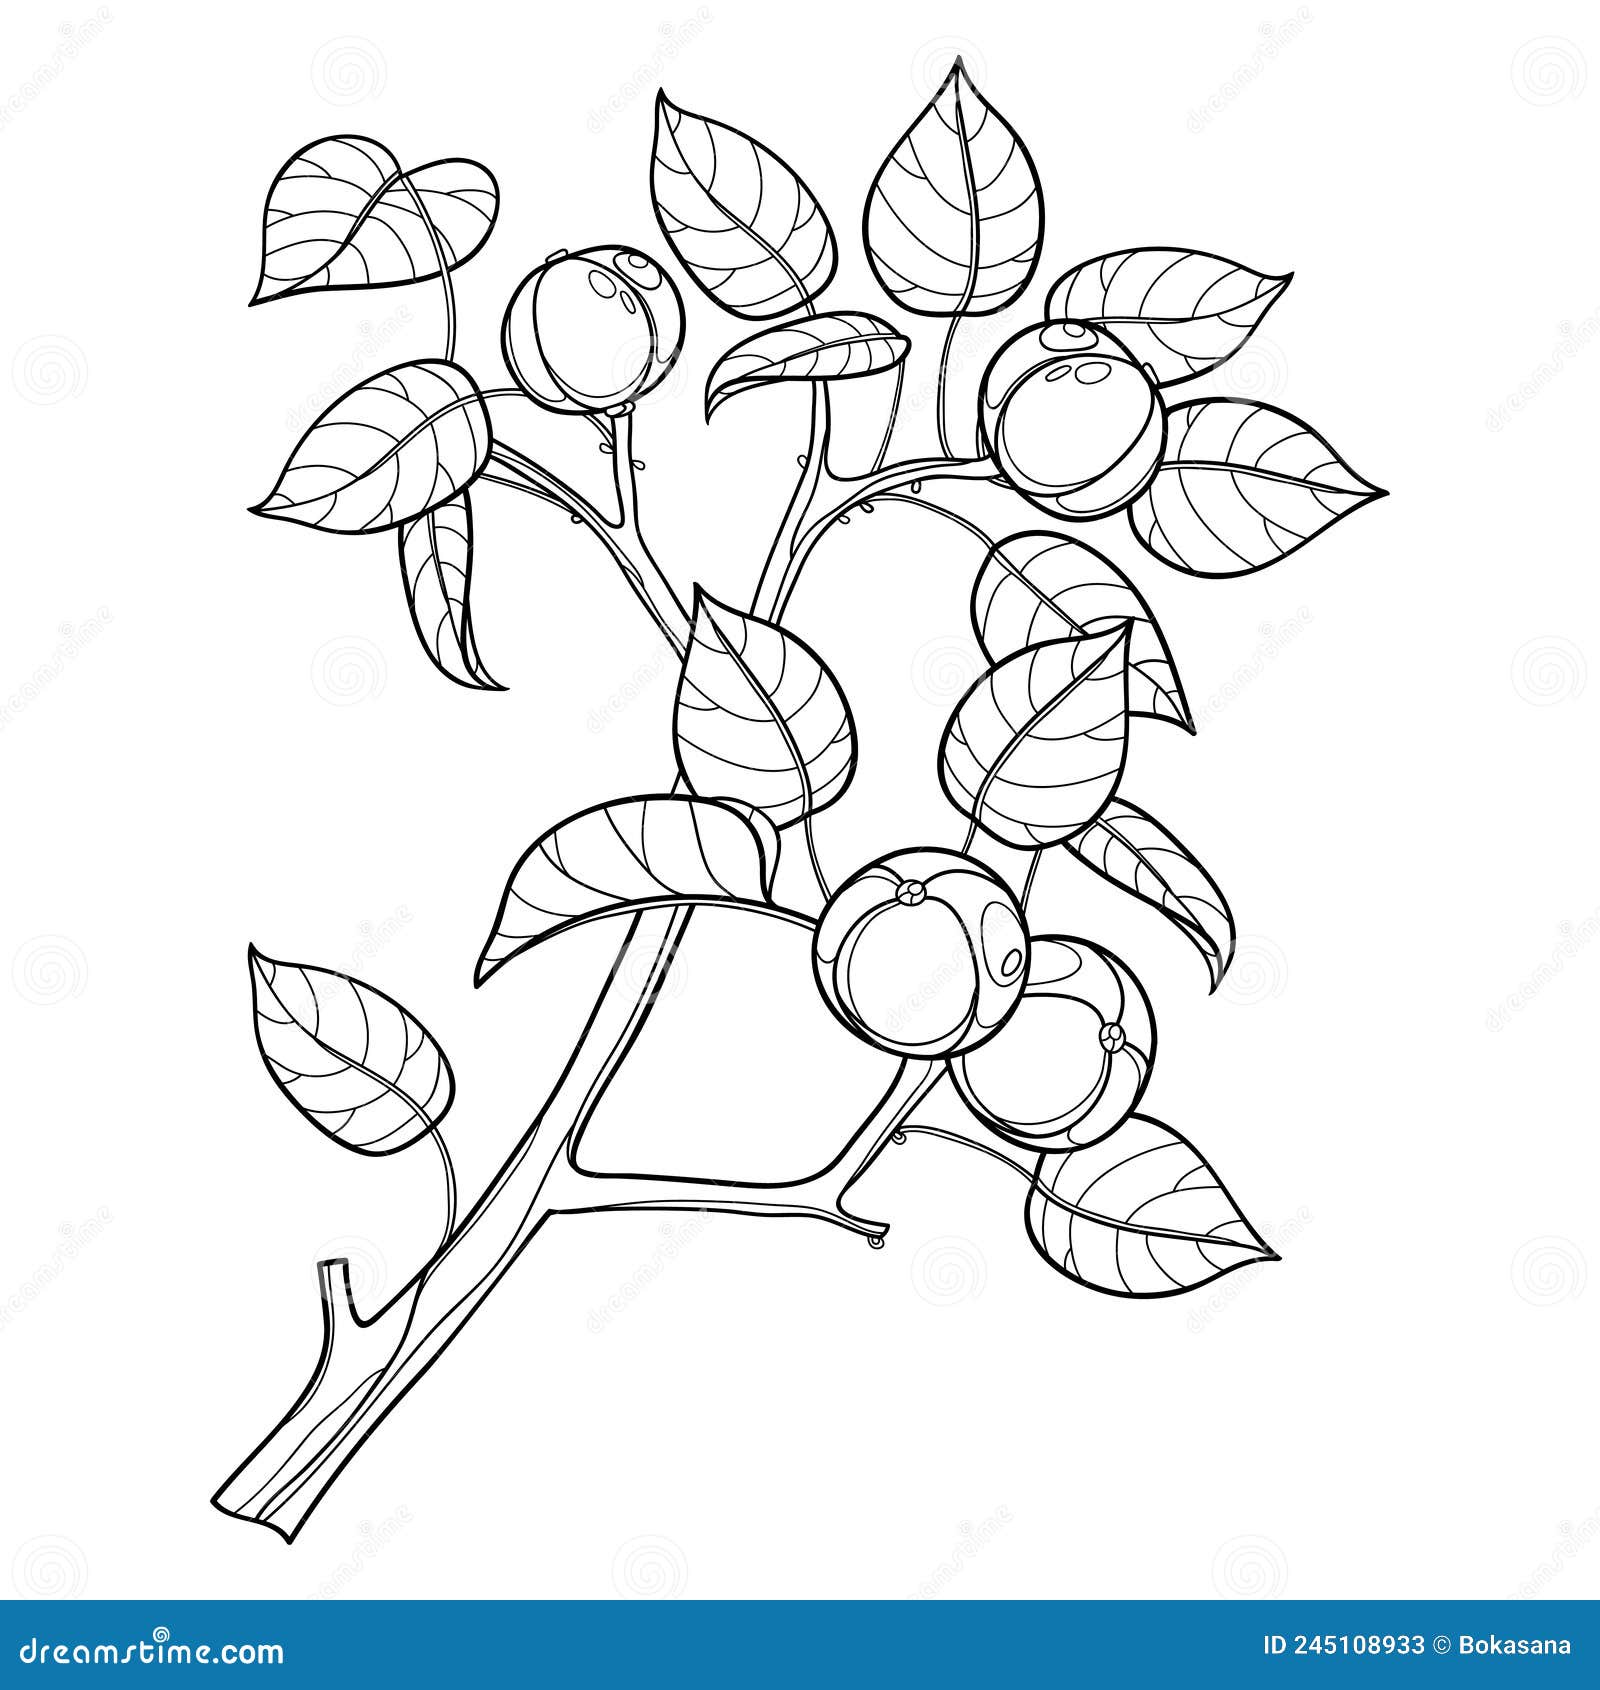  branch of outline poisonous manchineel tree or hippomane mancinella in black  on white background.